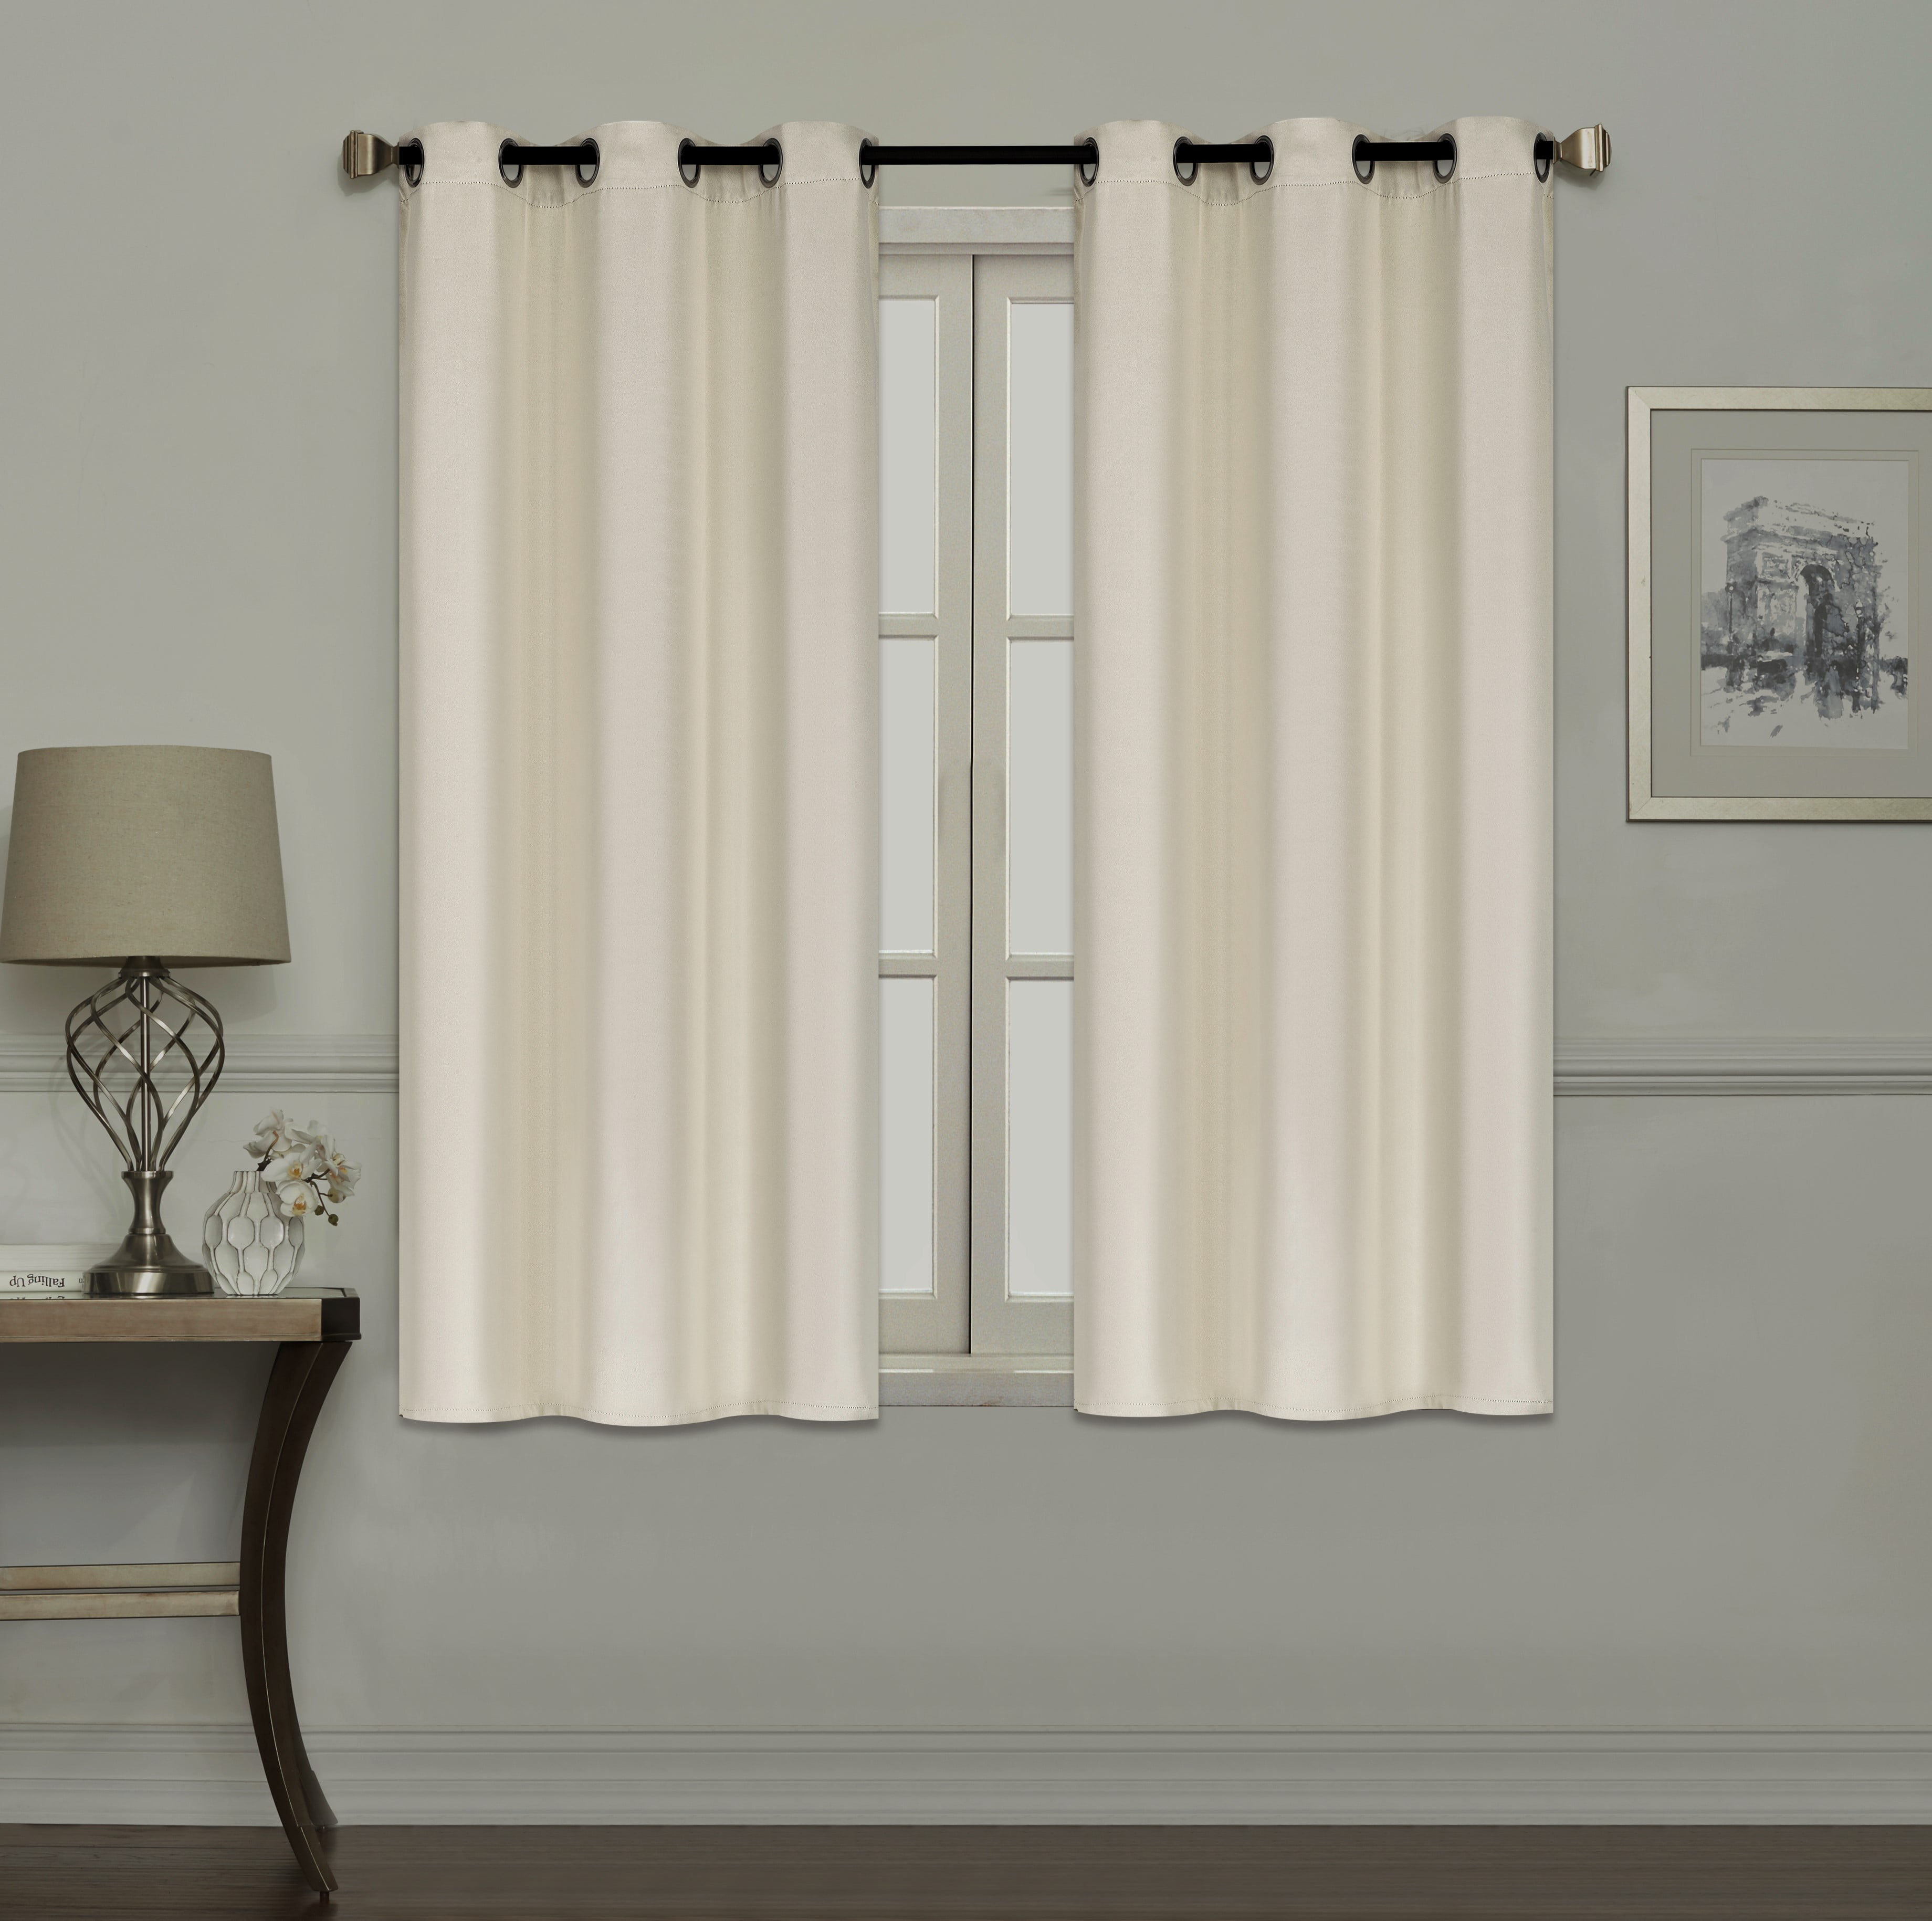 Thermal Insulated Grommet Blackout Curtain for Bedroom 2 Panels, 40"x63" 